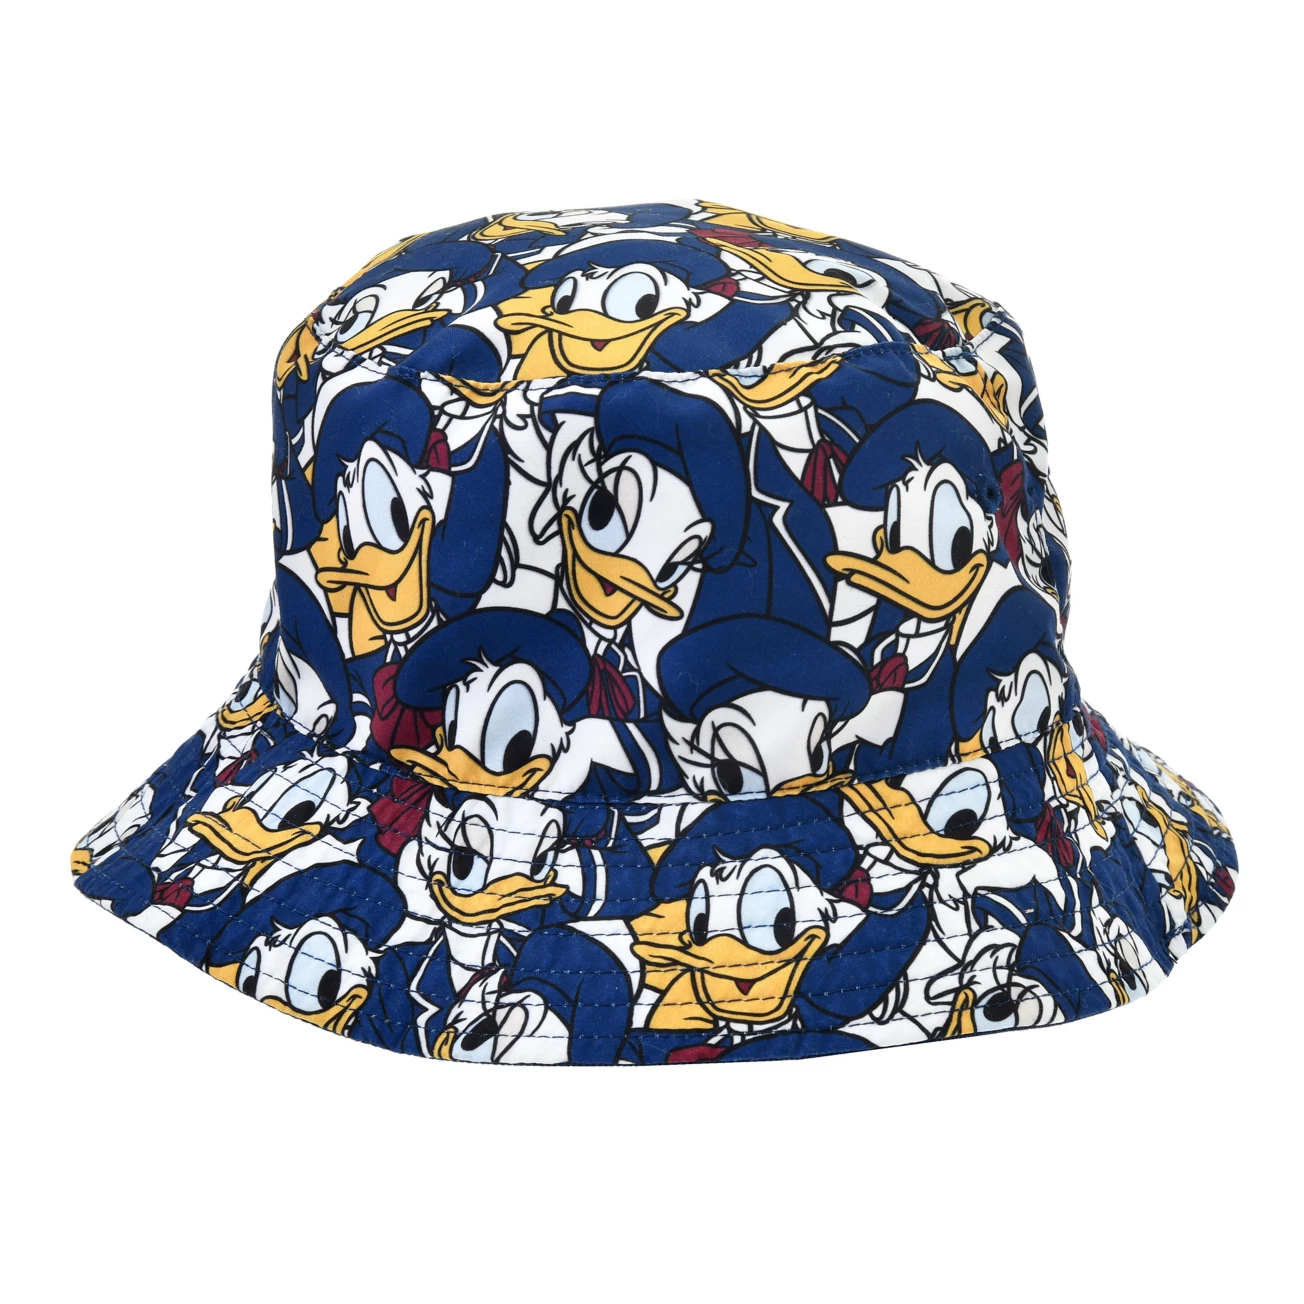 SDJ - DONALD DUCK IT'S MY STYLE Collection - Revisable bucket hat